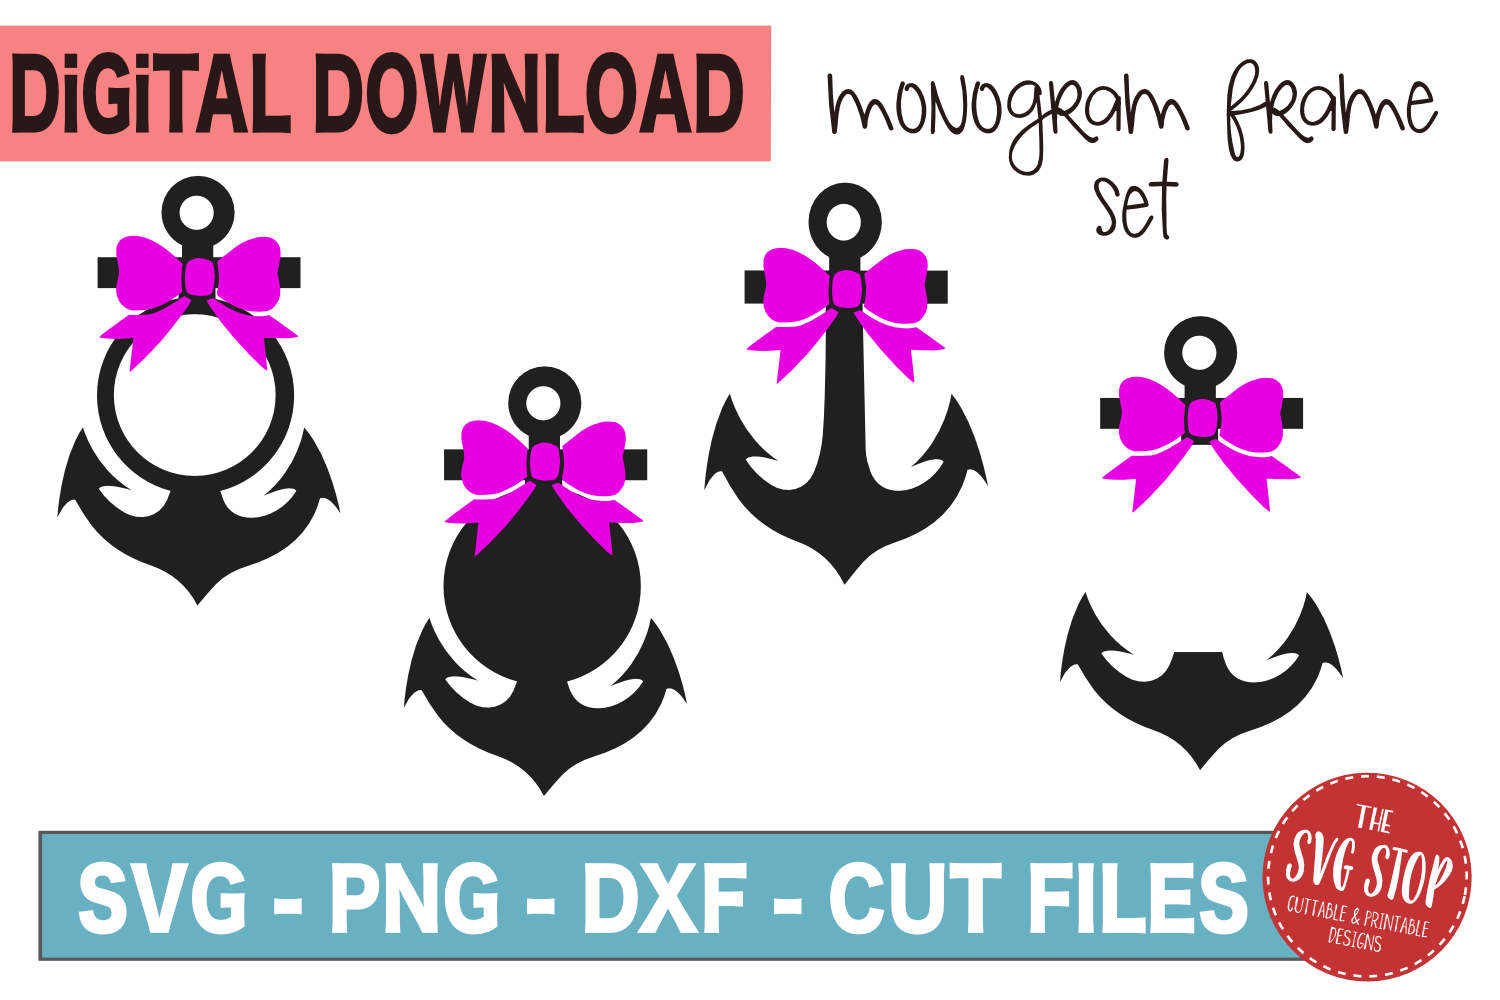 Download Anchor Monogram Frames With Bow -SVG, PNG, DXF